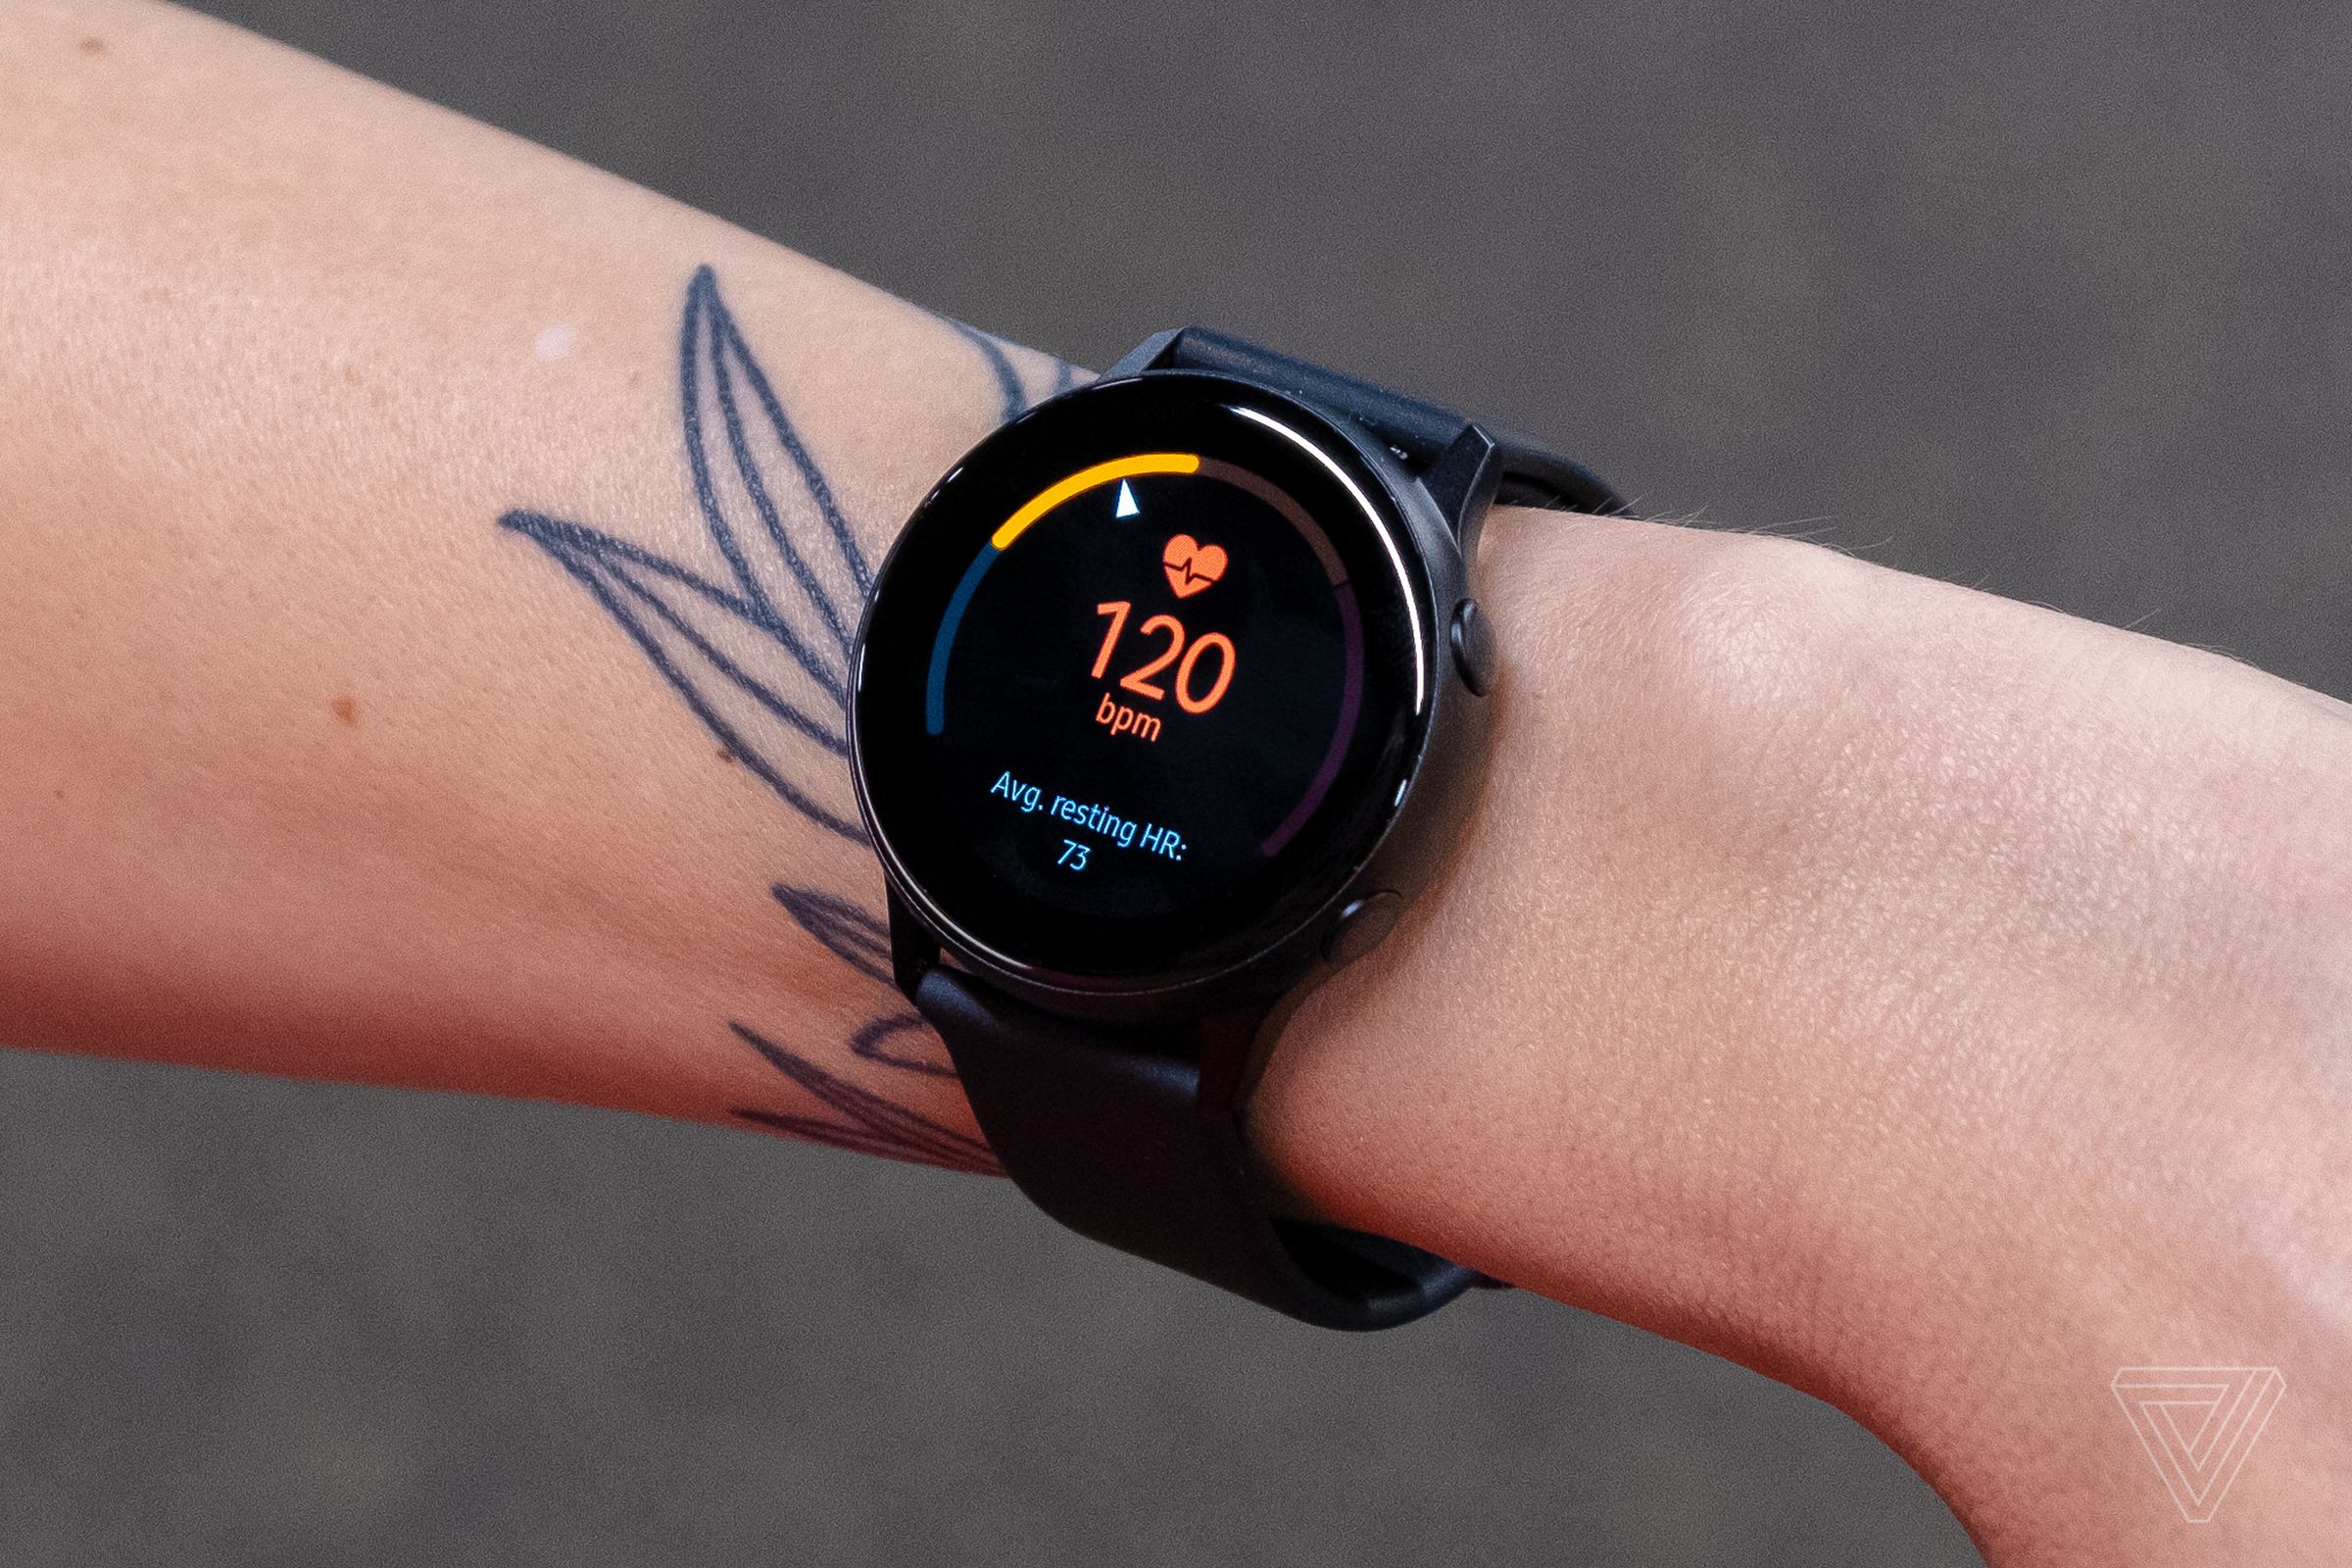 Measuring heart rate on the Samsung Galaxy Watch Active